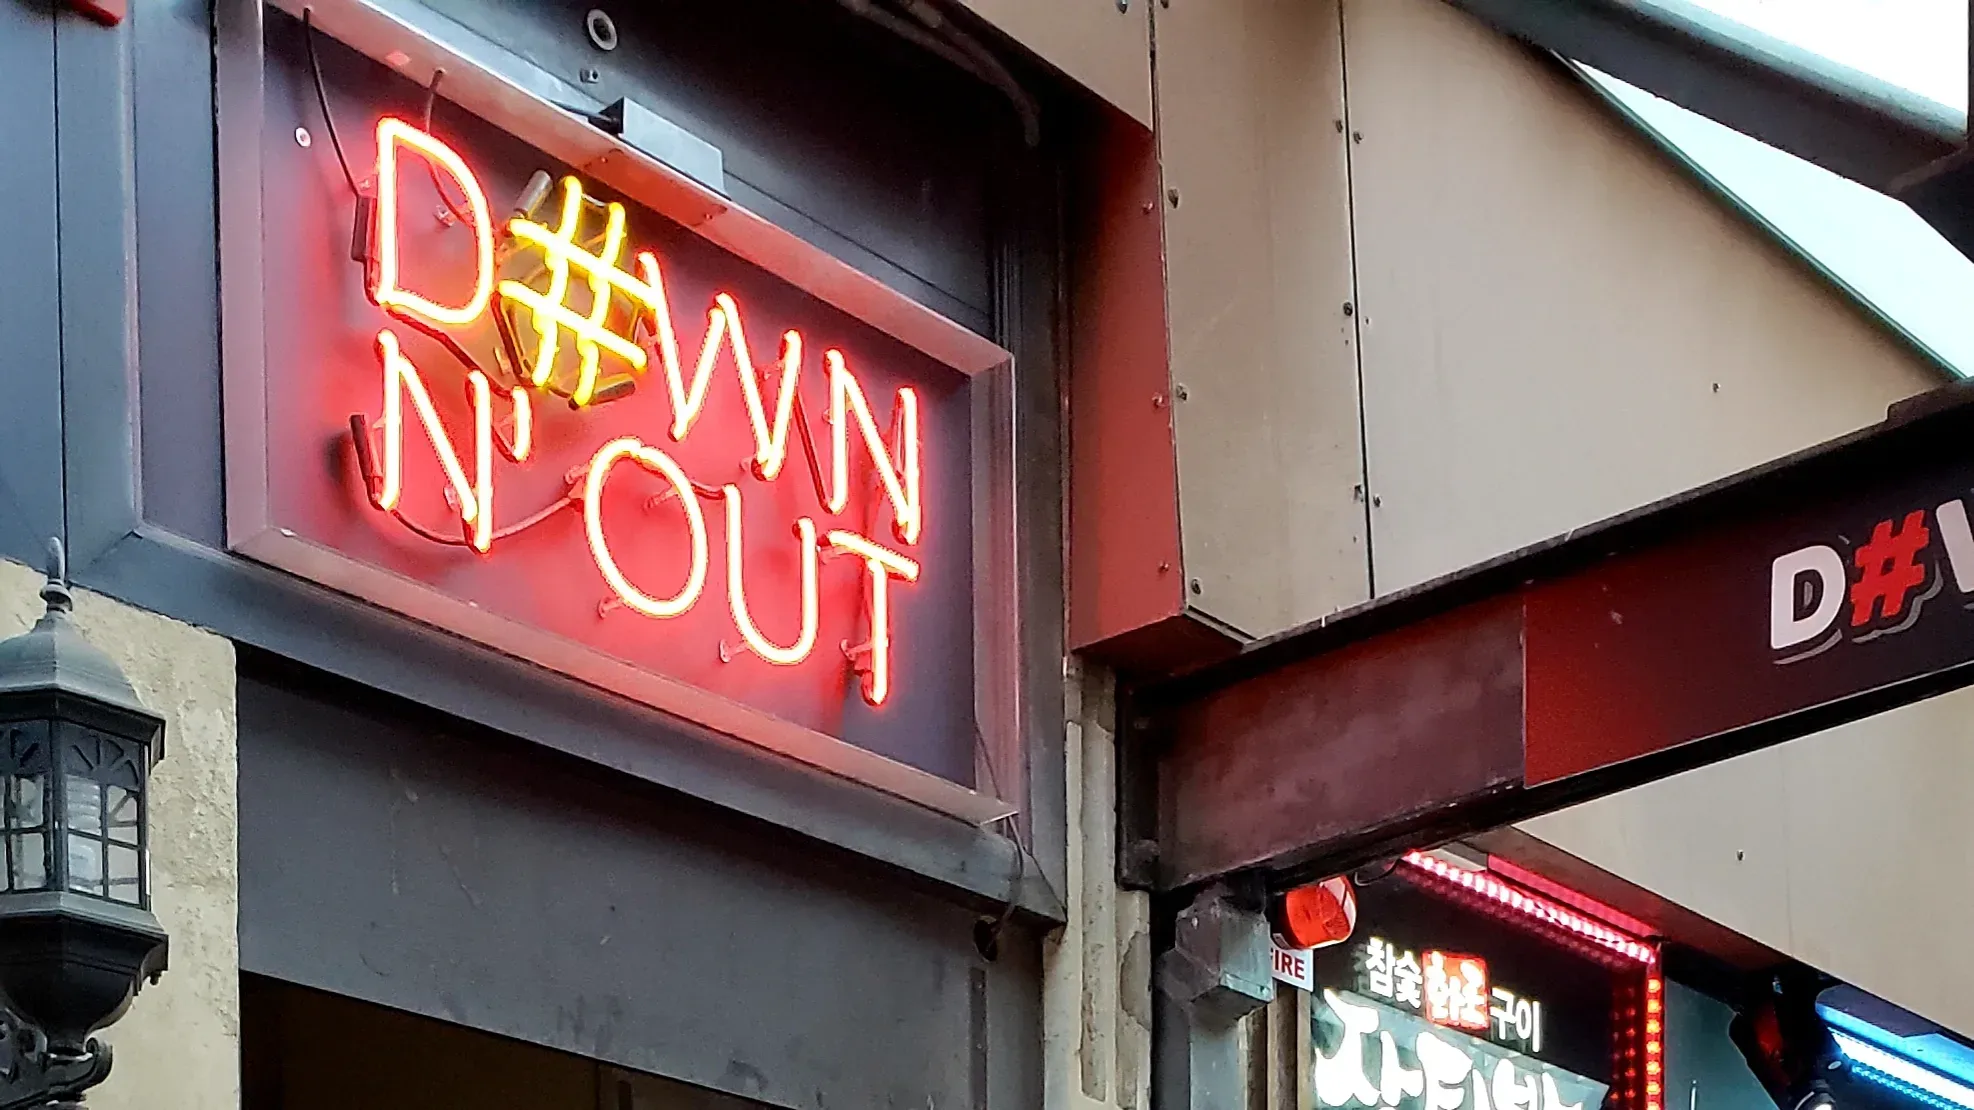 down n out sydney sign